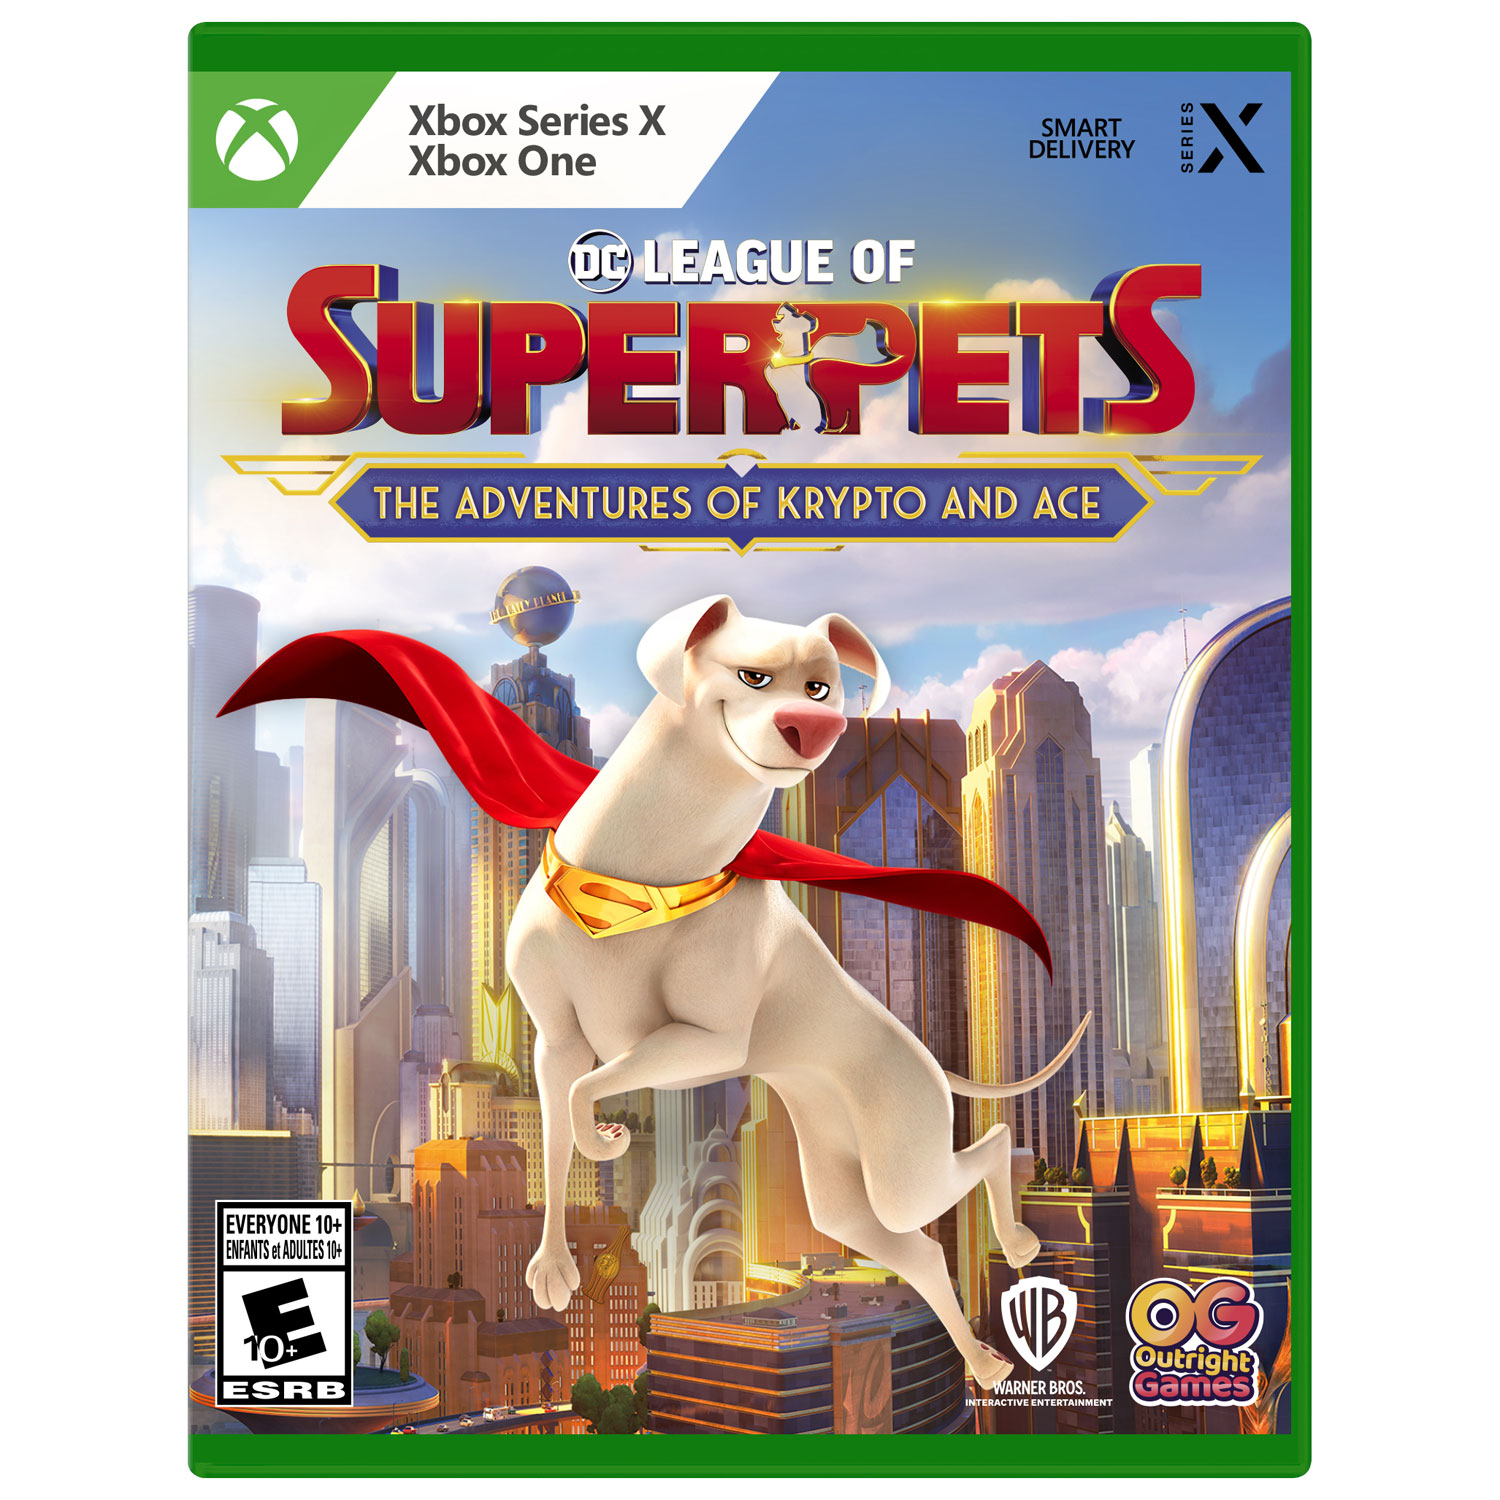 DC League of Super-Pets: The Adventures of Krypto and Ace (Xbox Series X / Xbox One)